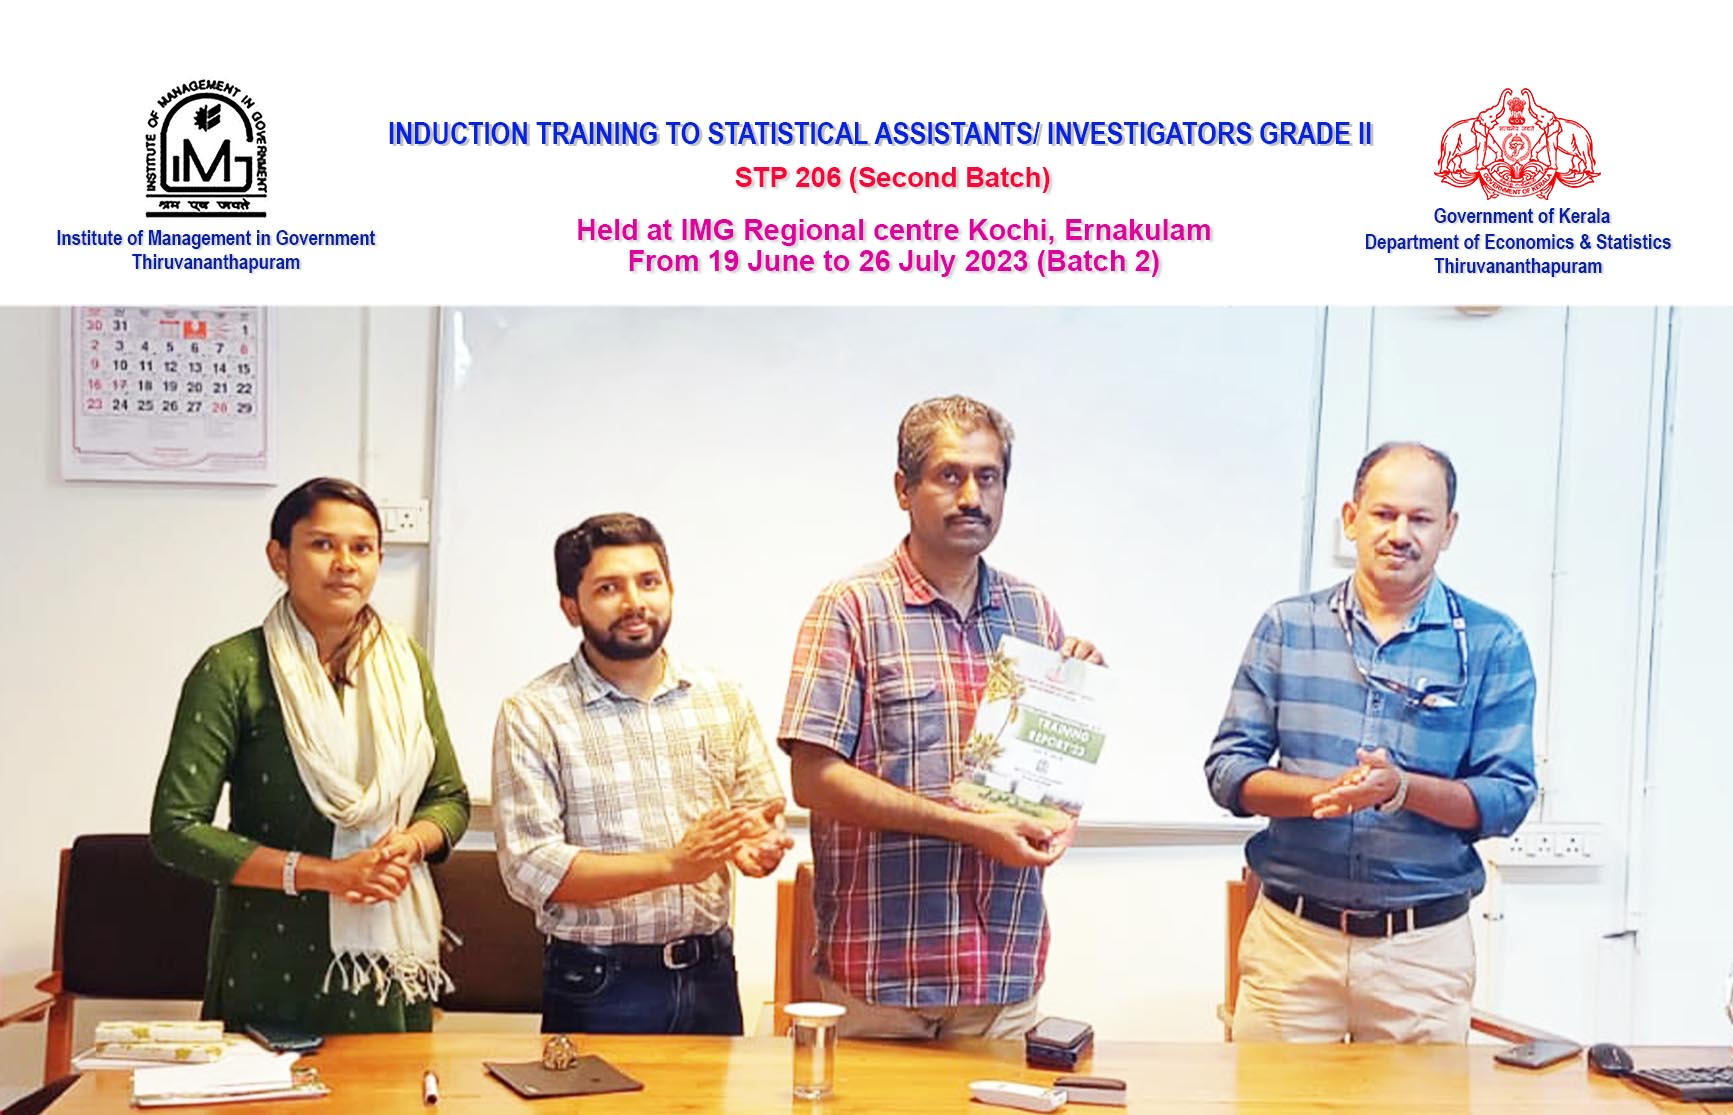 Release of Book by Director Sreekumar B - Induction Training to Statistical Assistants Grade II held at IMG Kochi 2nd Batch